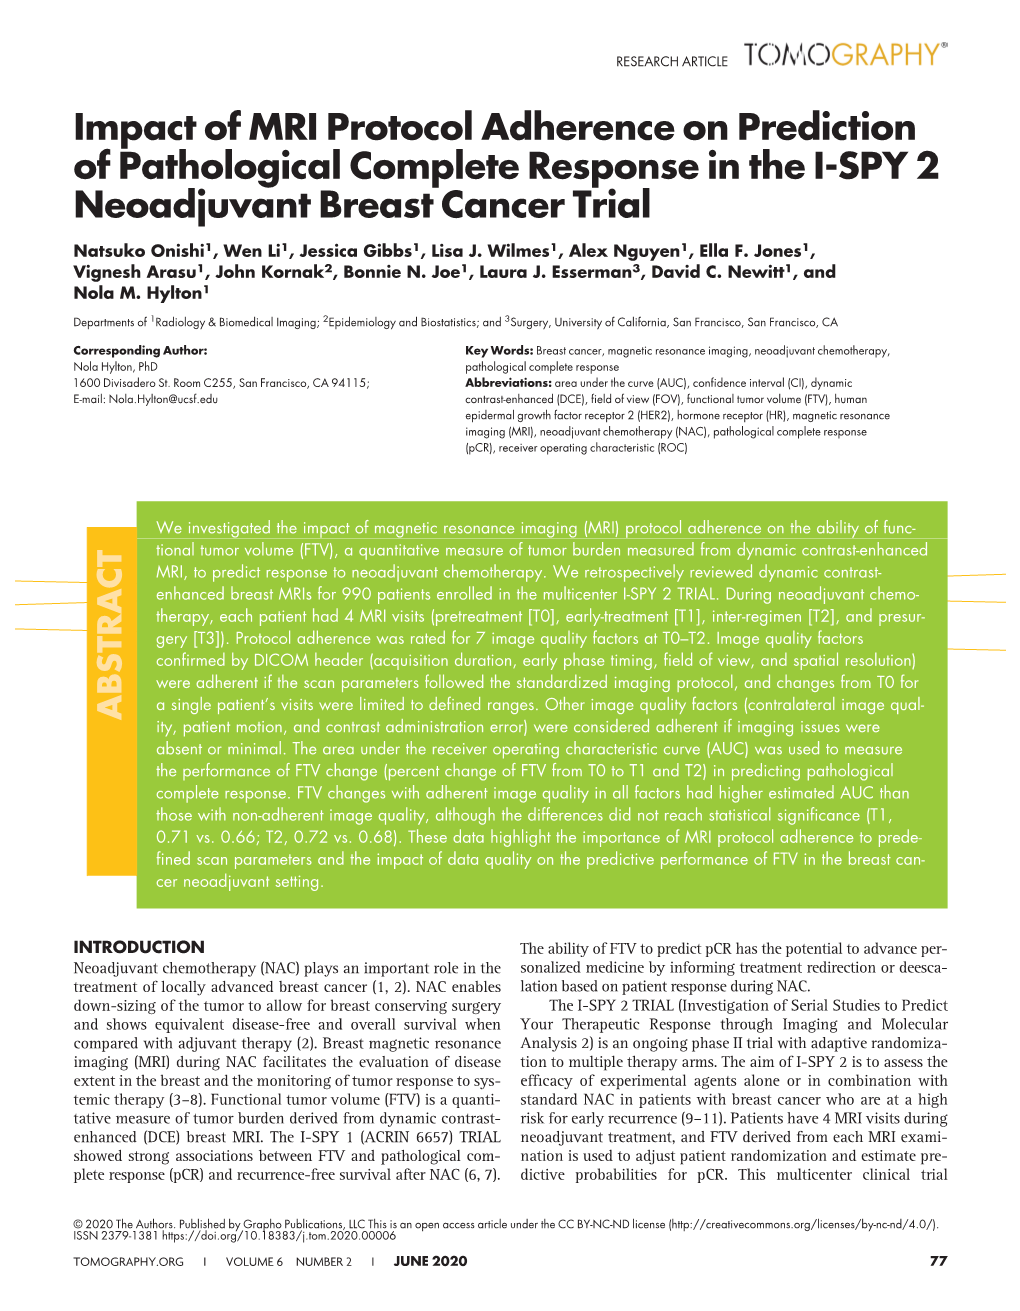 Impact of MRI Protocol Adherence on Prediction of Pathological Complete Response in the I-SPY 2 Neoadjuvant Breast Cancer Trial